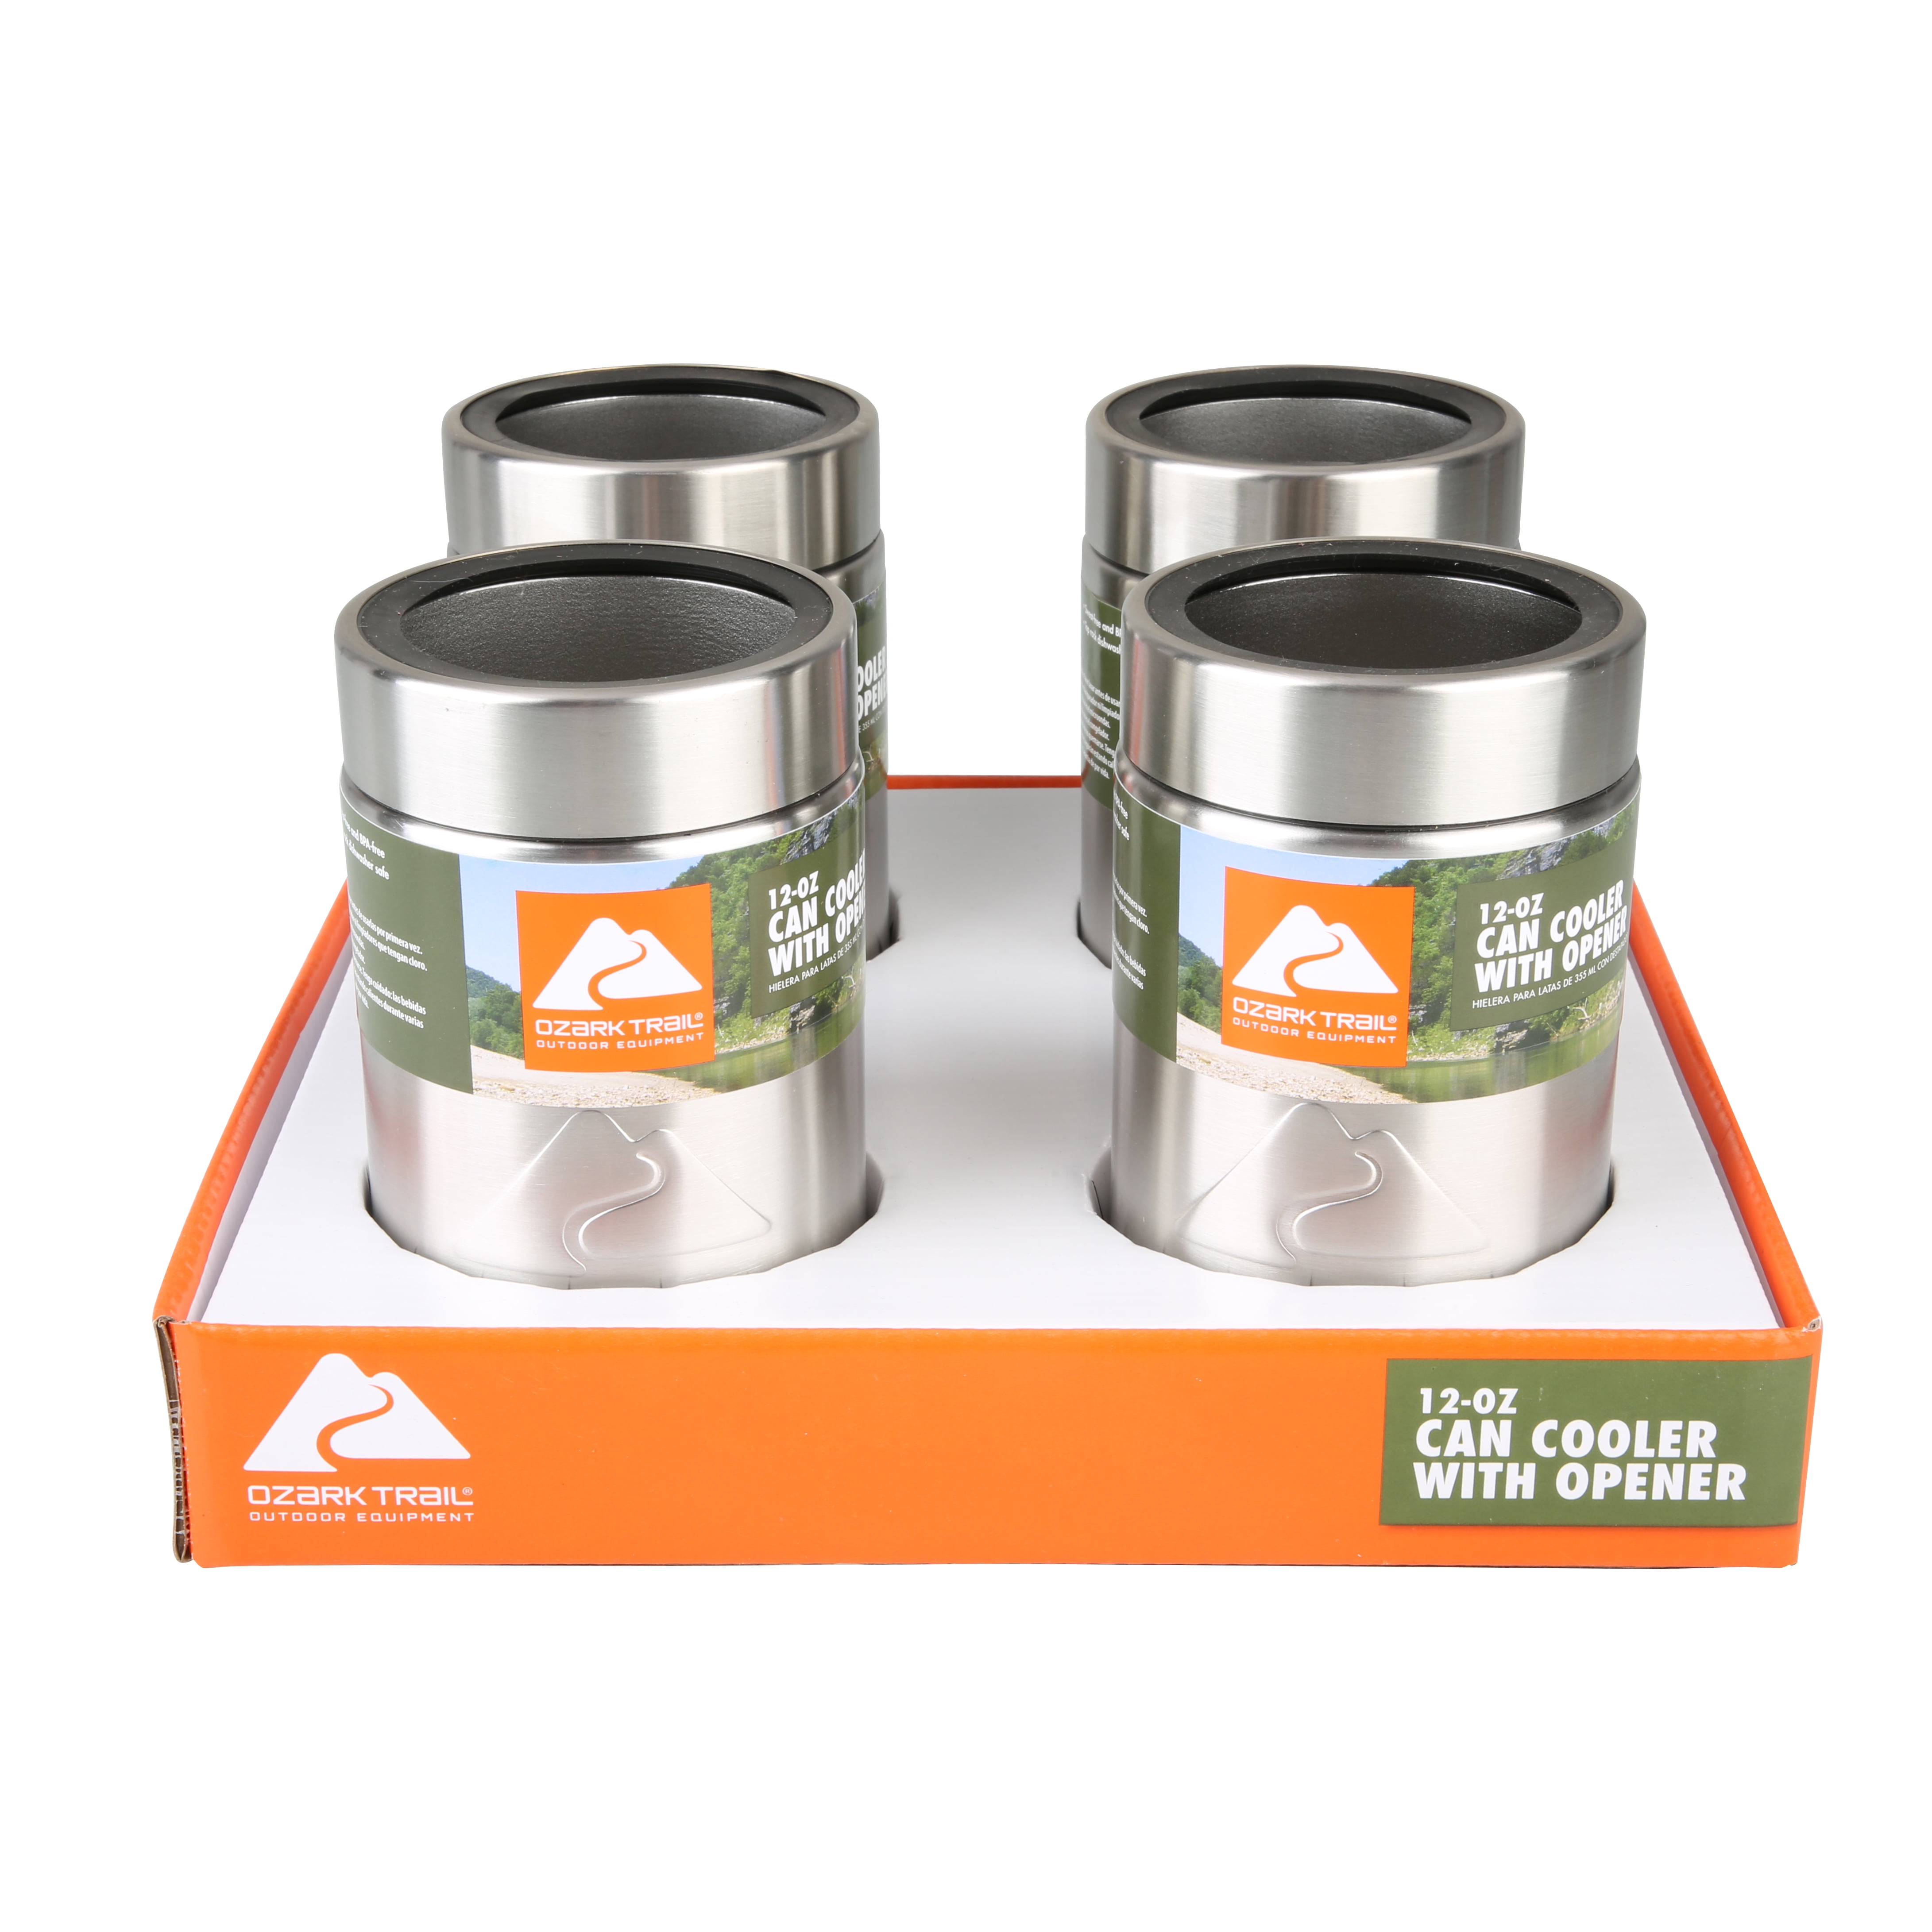 Coool-it, Slim Can Adapter fits Yeti, Ozark Trail, RTIC stainless coozies